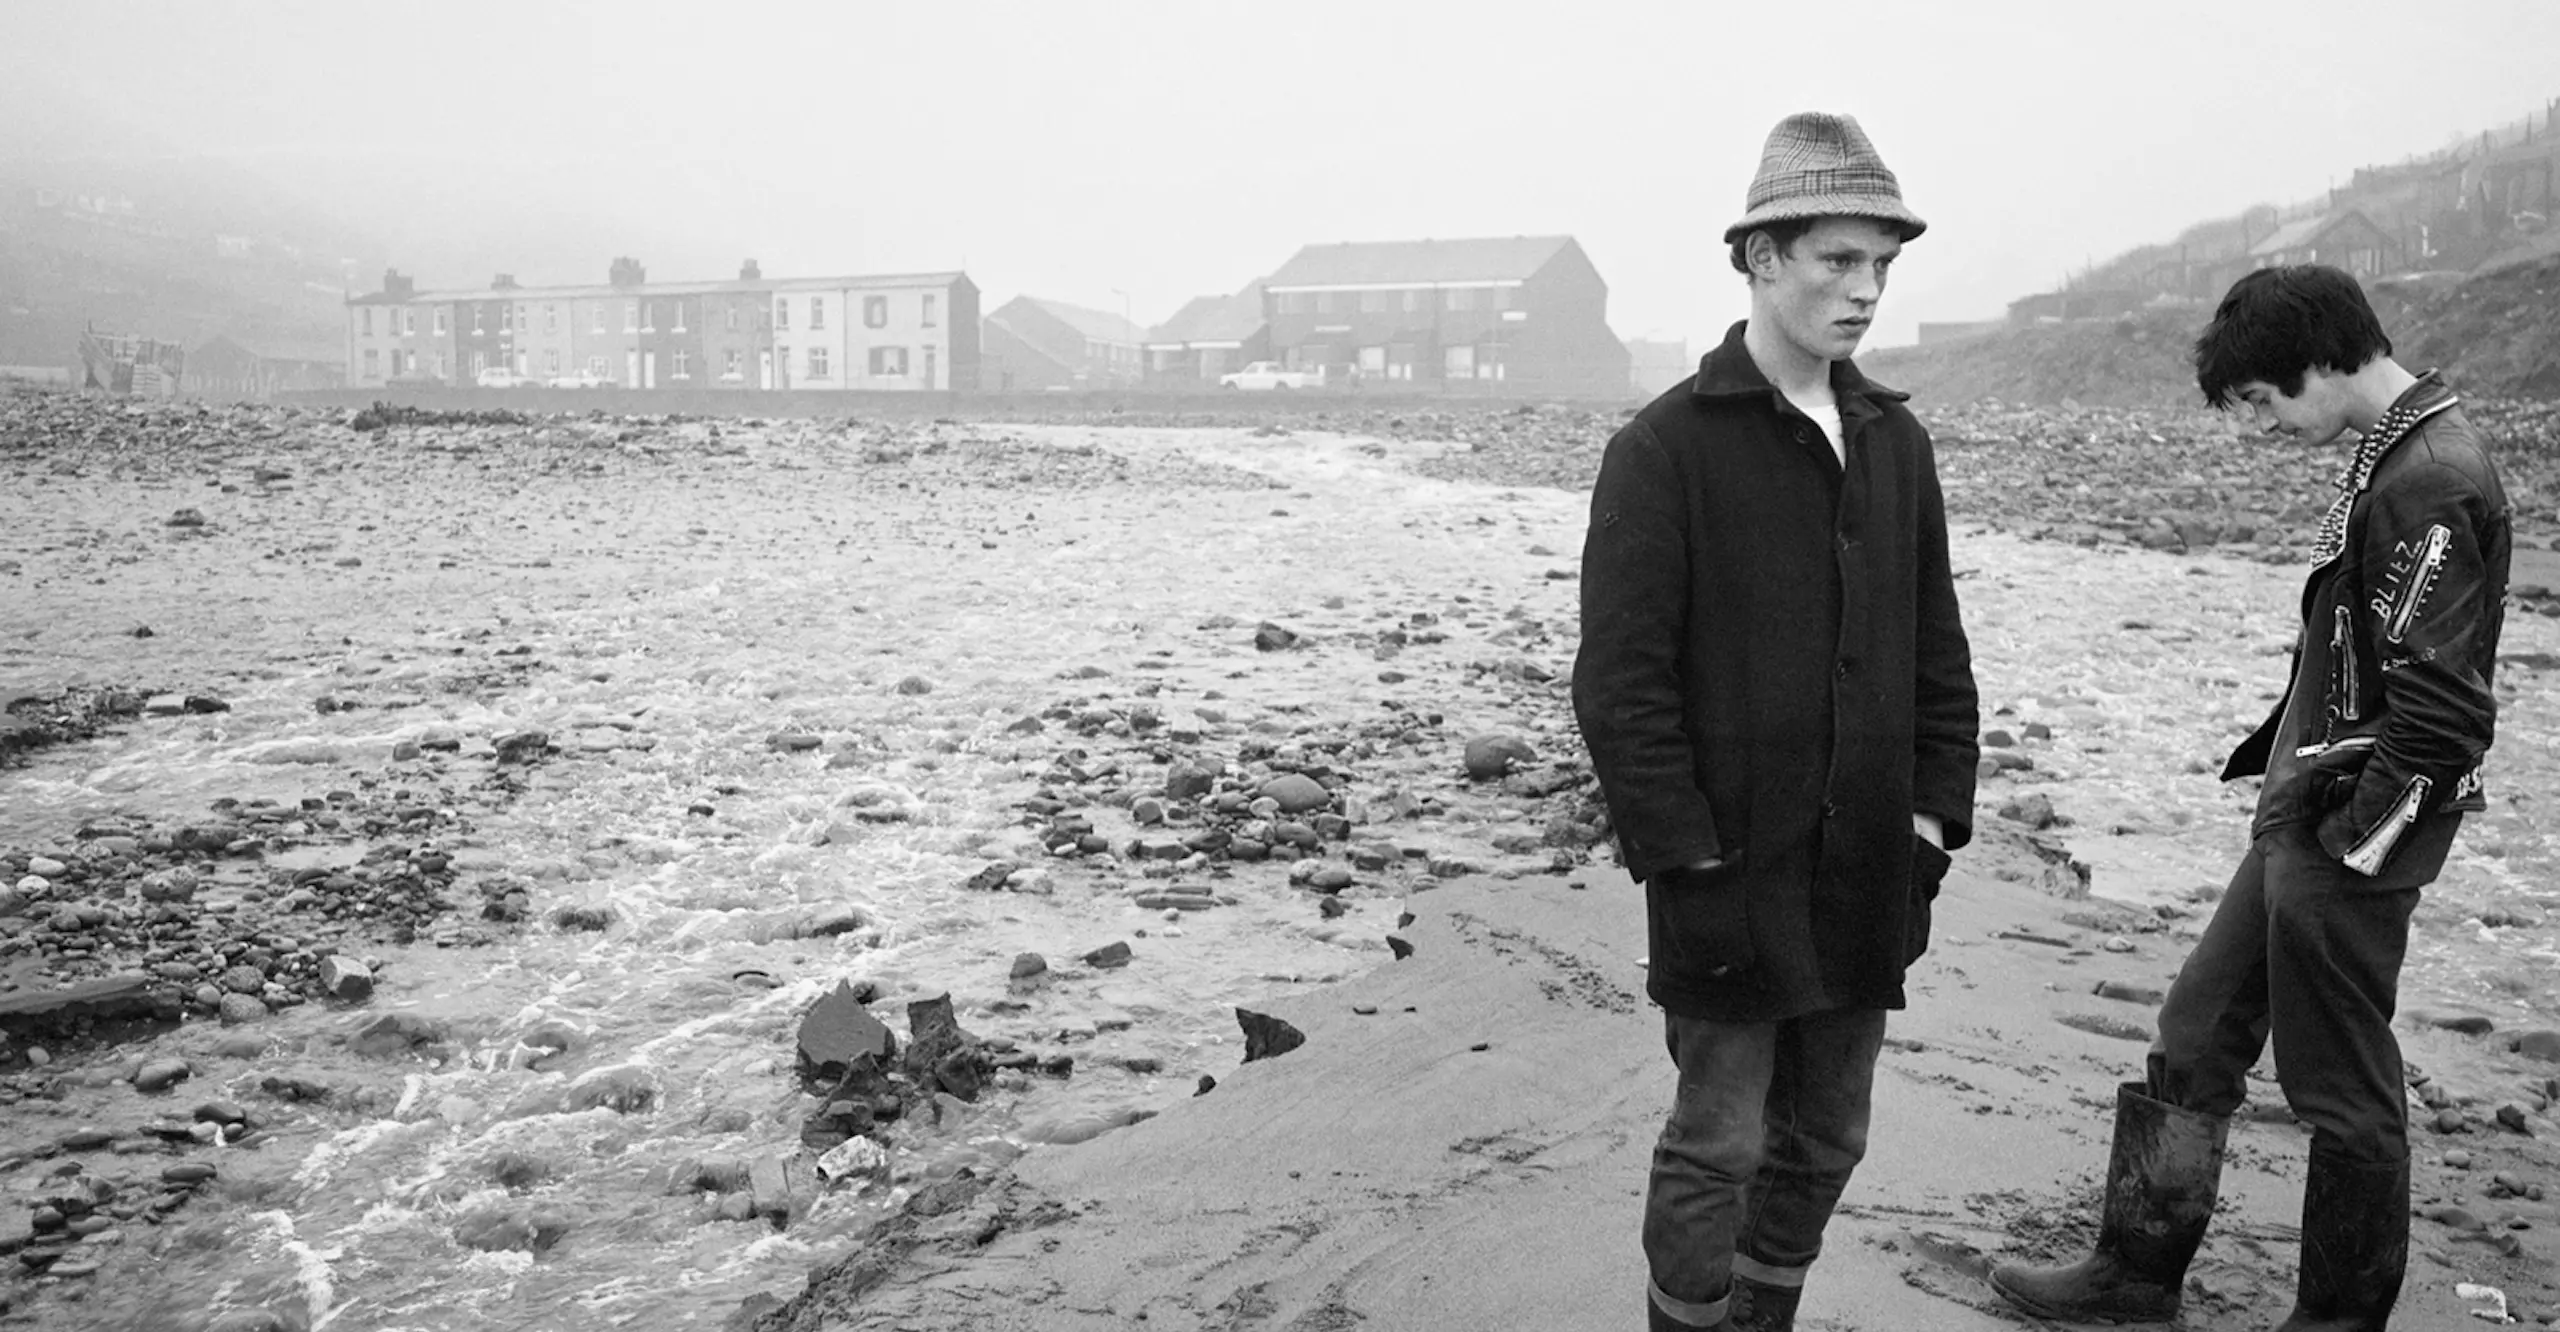 Black and white photo featuring two young people standing on a beach on a bleak day.